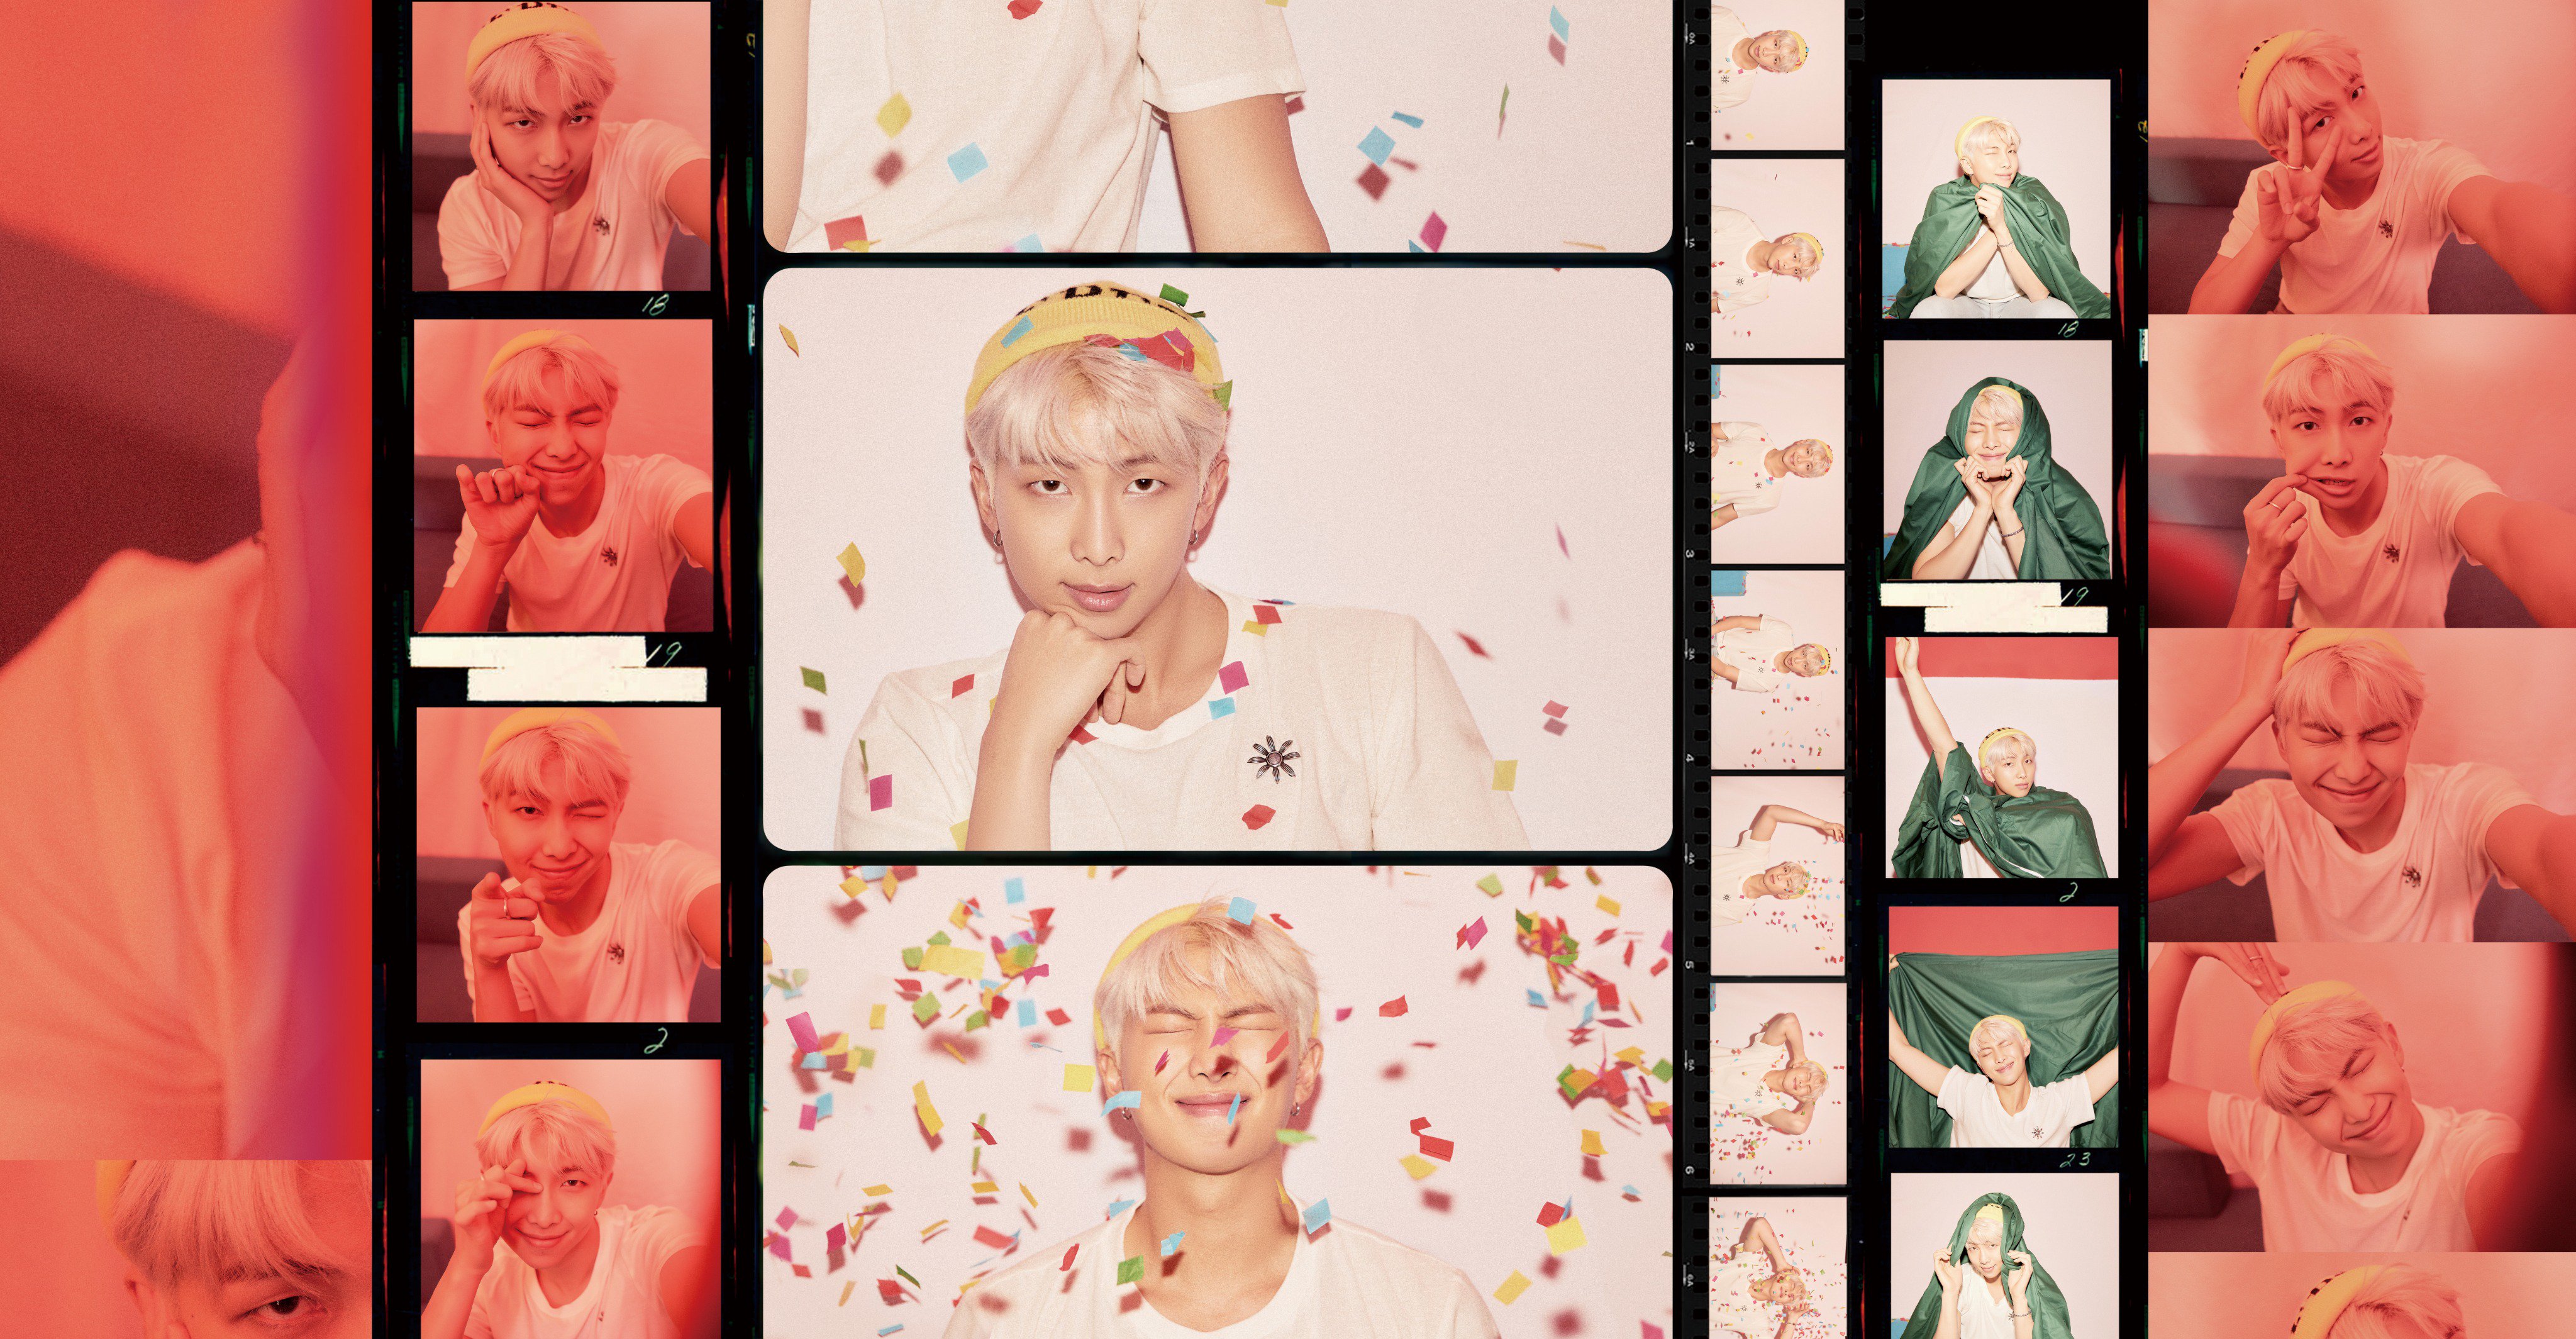 Bts Rm Map Of The Soul Persona - Bts Map Of The Soul Persona Concept - HD Wallpaper 